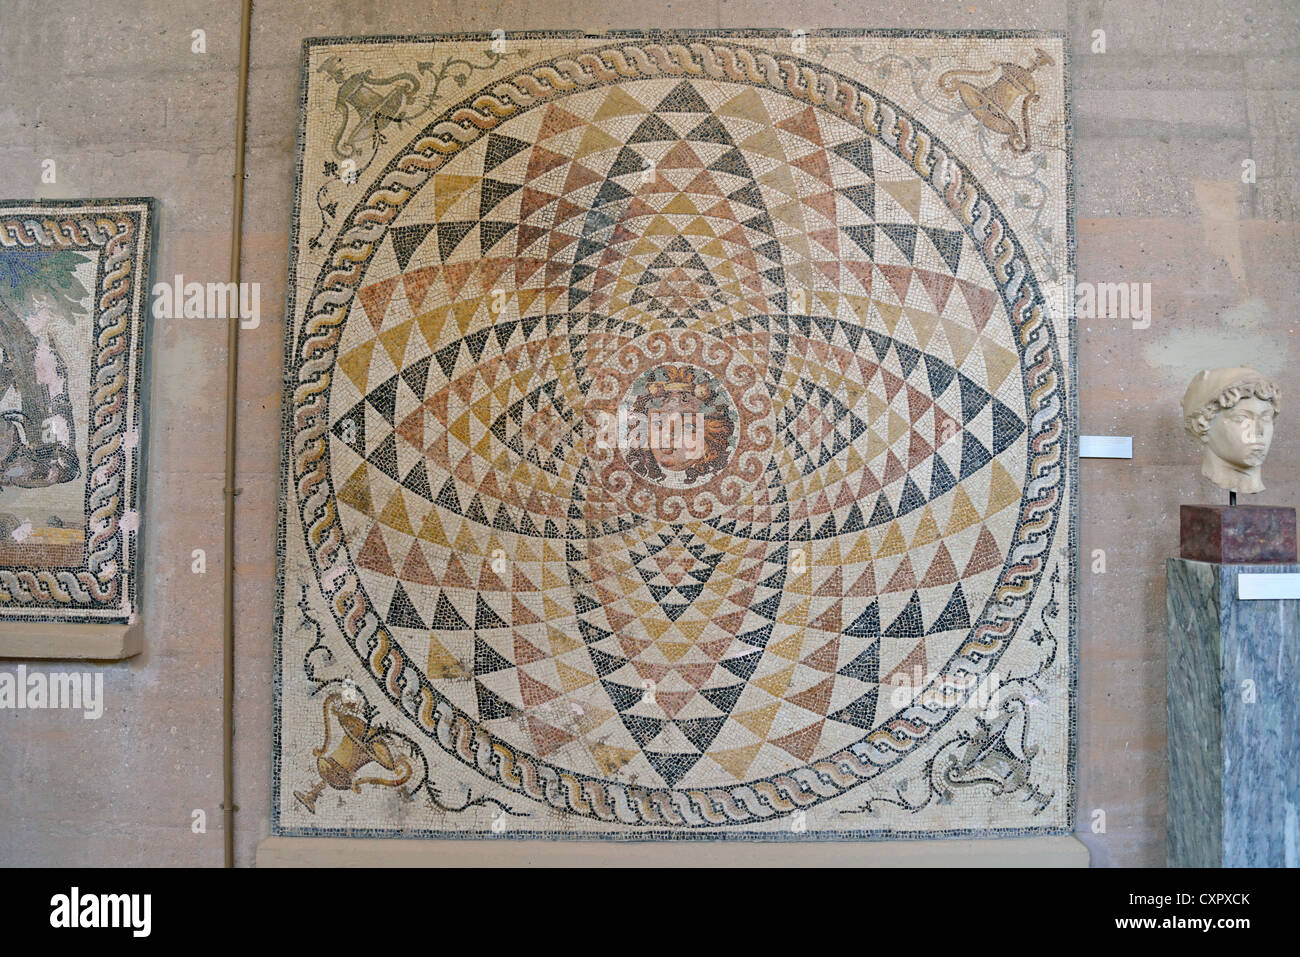 Mosaic floor panel from Roma villa, The Archaeological Museum, Ancient Corinth, Corinth Municipality, Peloponnese Region, Greece Stock Photo